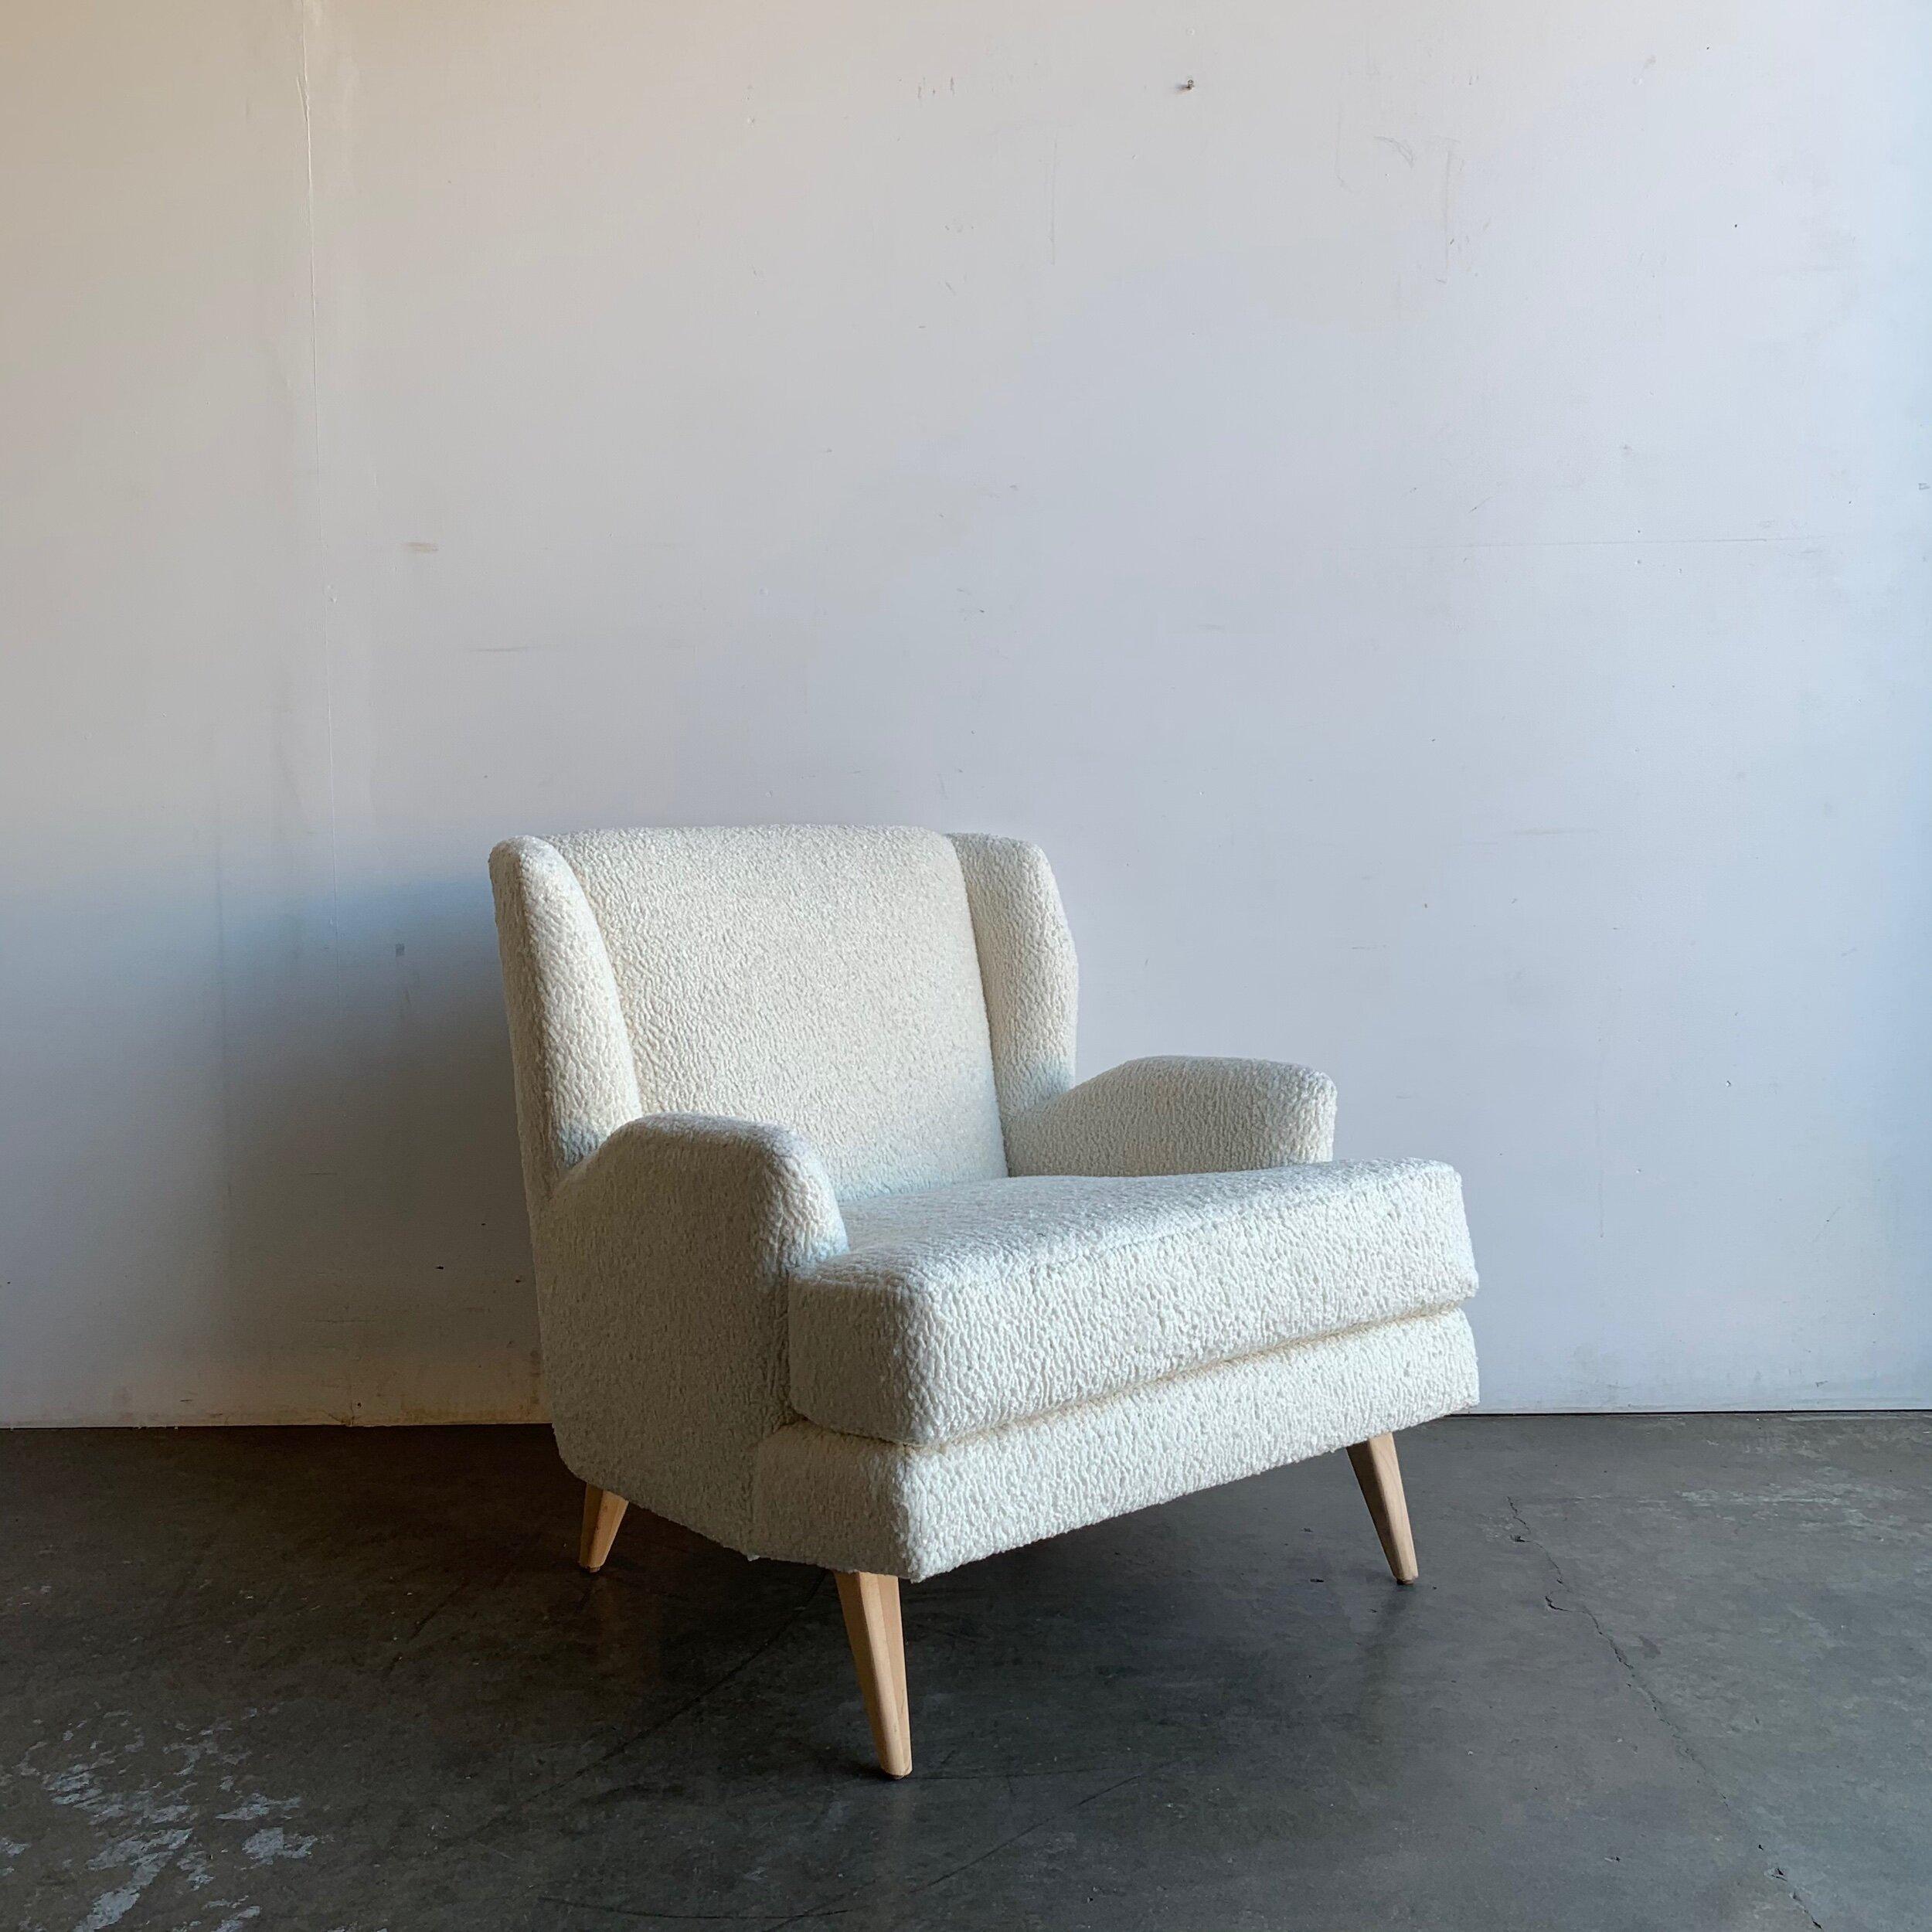 Handcrafted wingback chair in white Sherpa fabric. This can be made in any fabric. This item is not currently available on the showroom floor but can be made available within 4-6 weeks after purchase in your choice of fabric, dimensions and